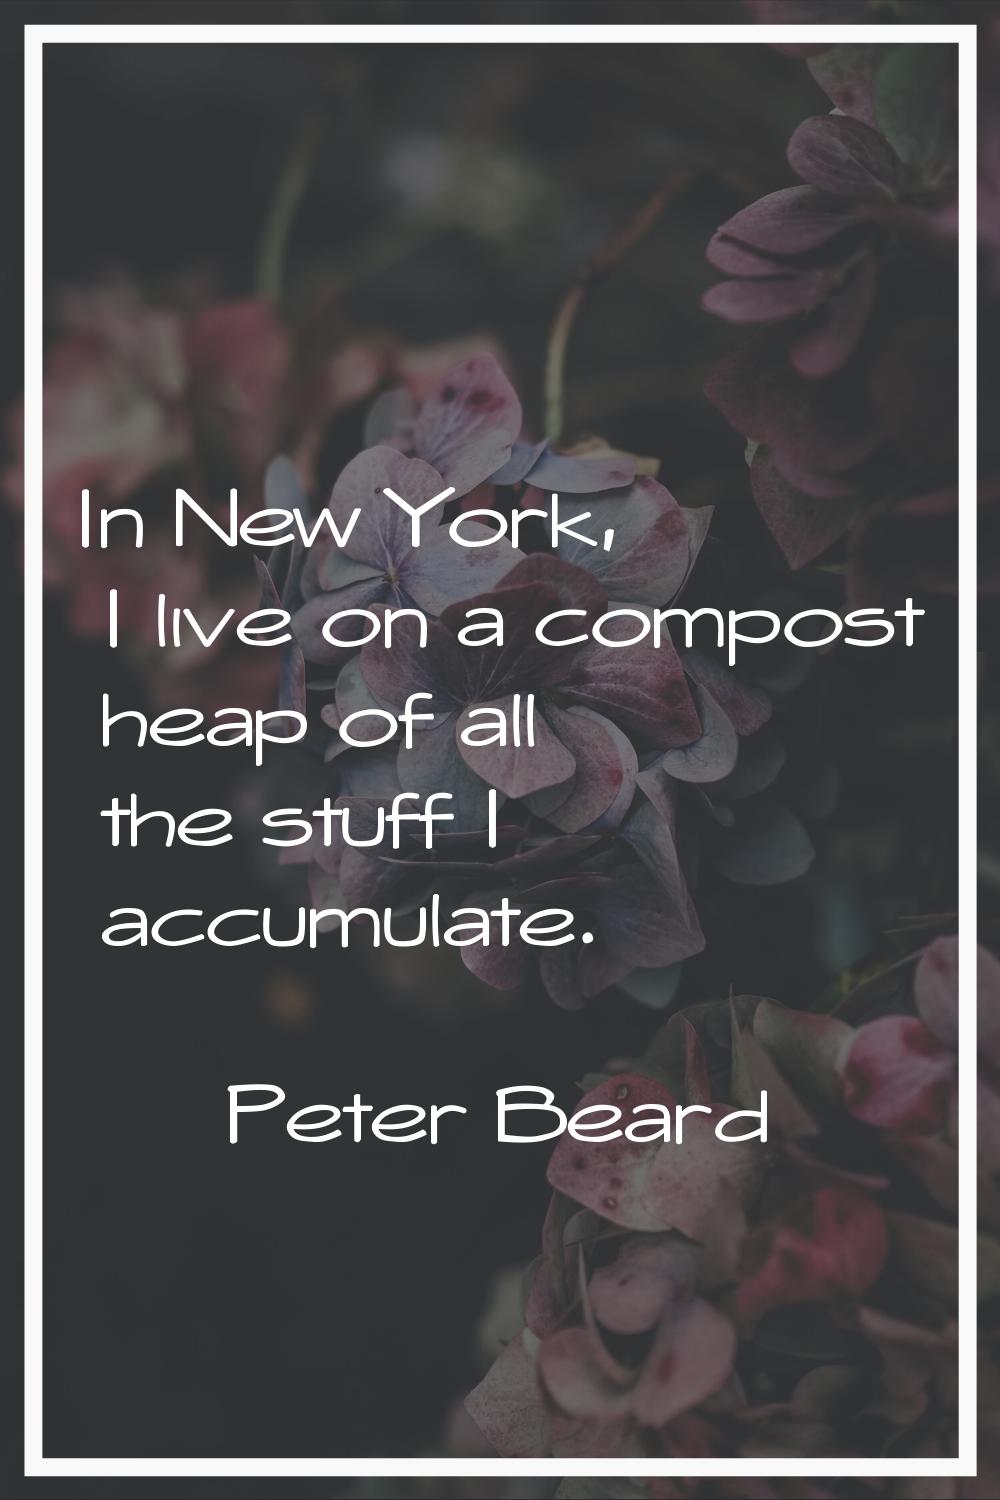 In New York, I live on a compost heap of all the stuff I accumulate.